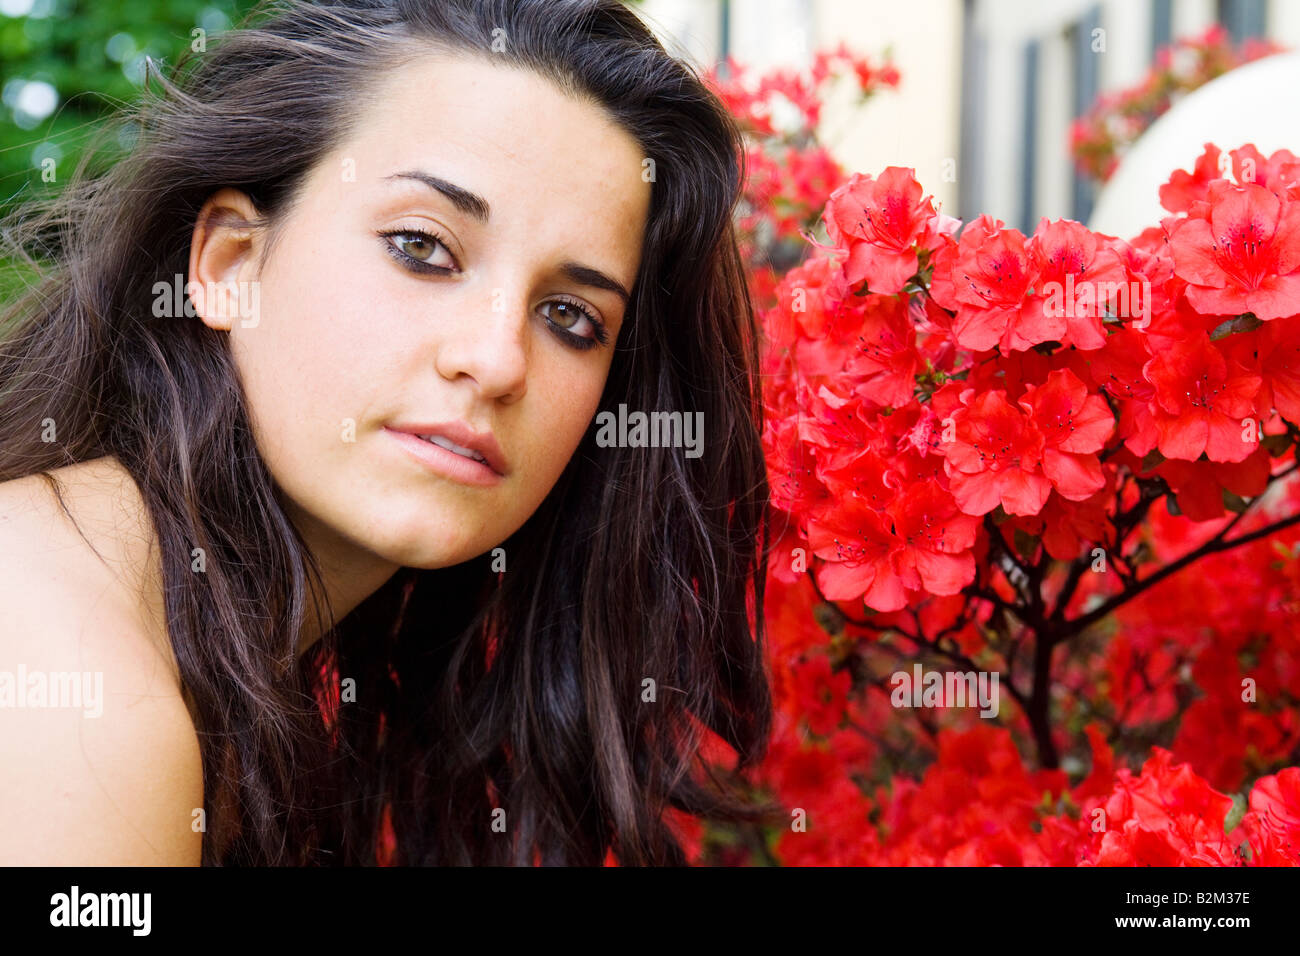 Young pretty girl close to red flowers Stock Photo